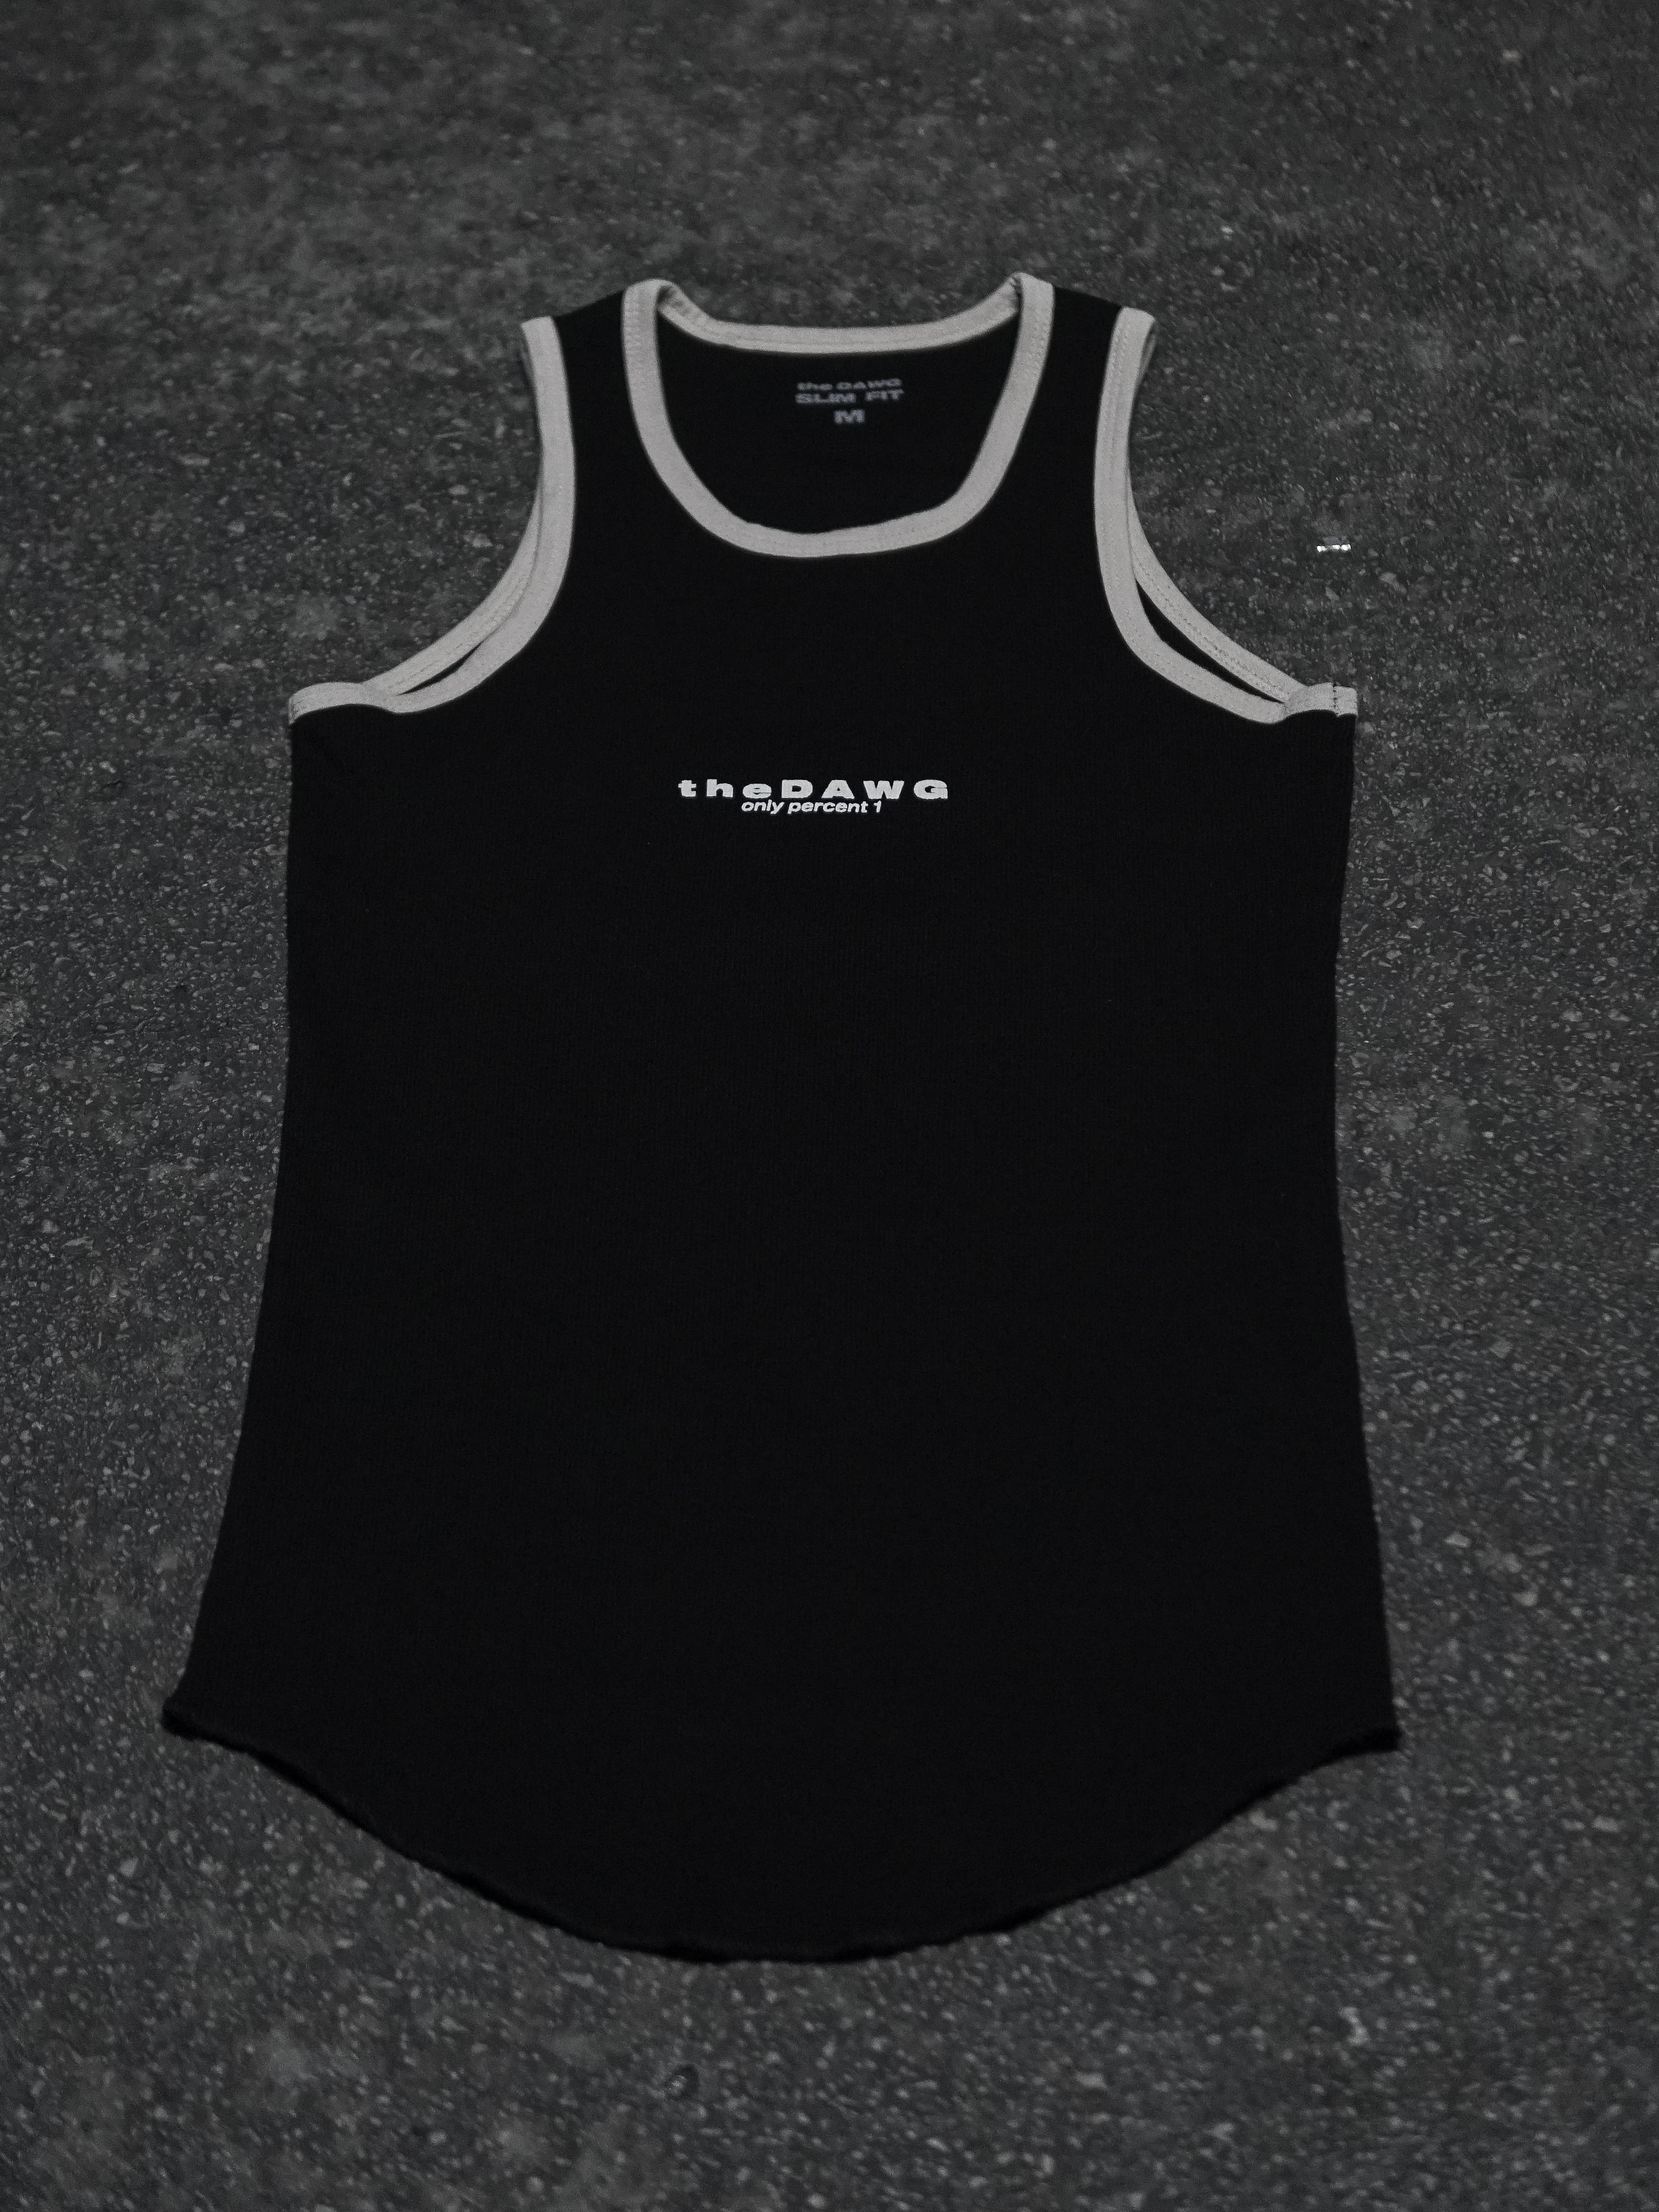 'theDAWG' Tank Top